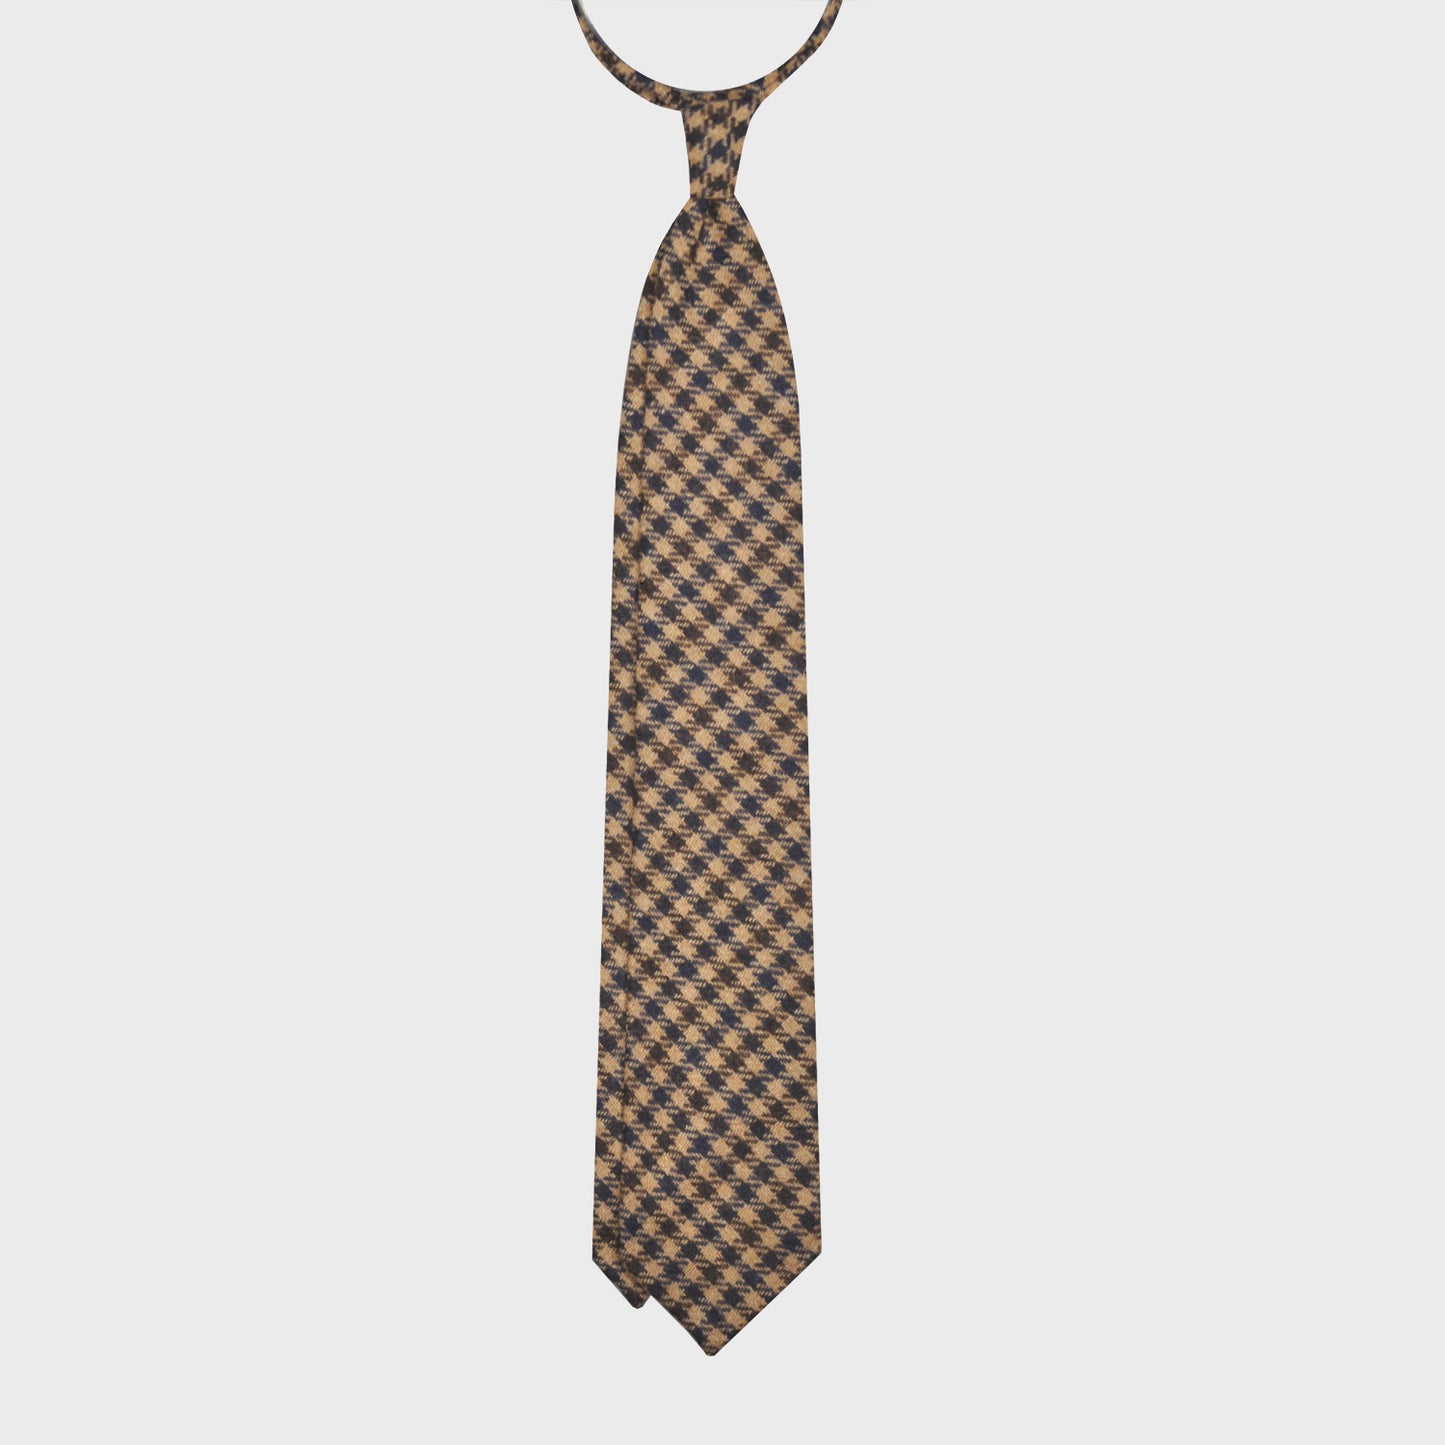 Camel Tweed Tie Classic Checked. Classic tweed tie, wool texture to the touch bristly feeling, unlined checked wool tie handmade in Italy by F.Marino Napoli exclusive for Wools Boutique Uomo